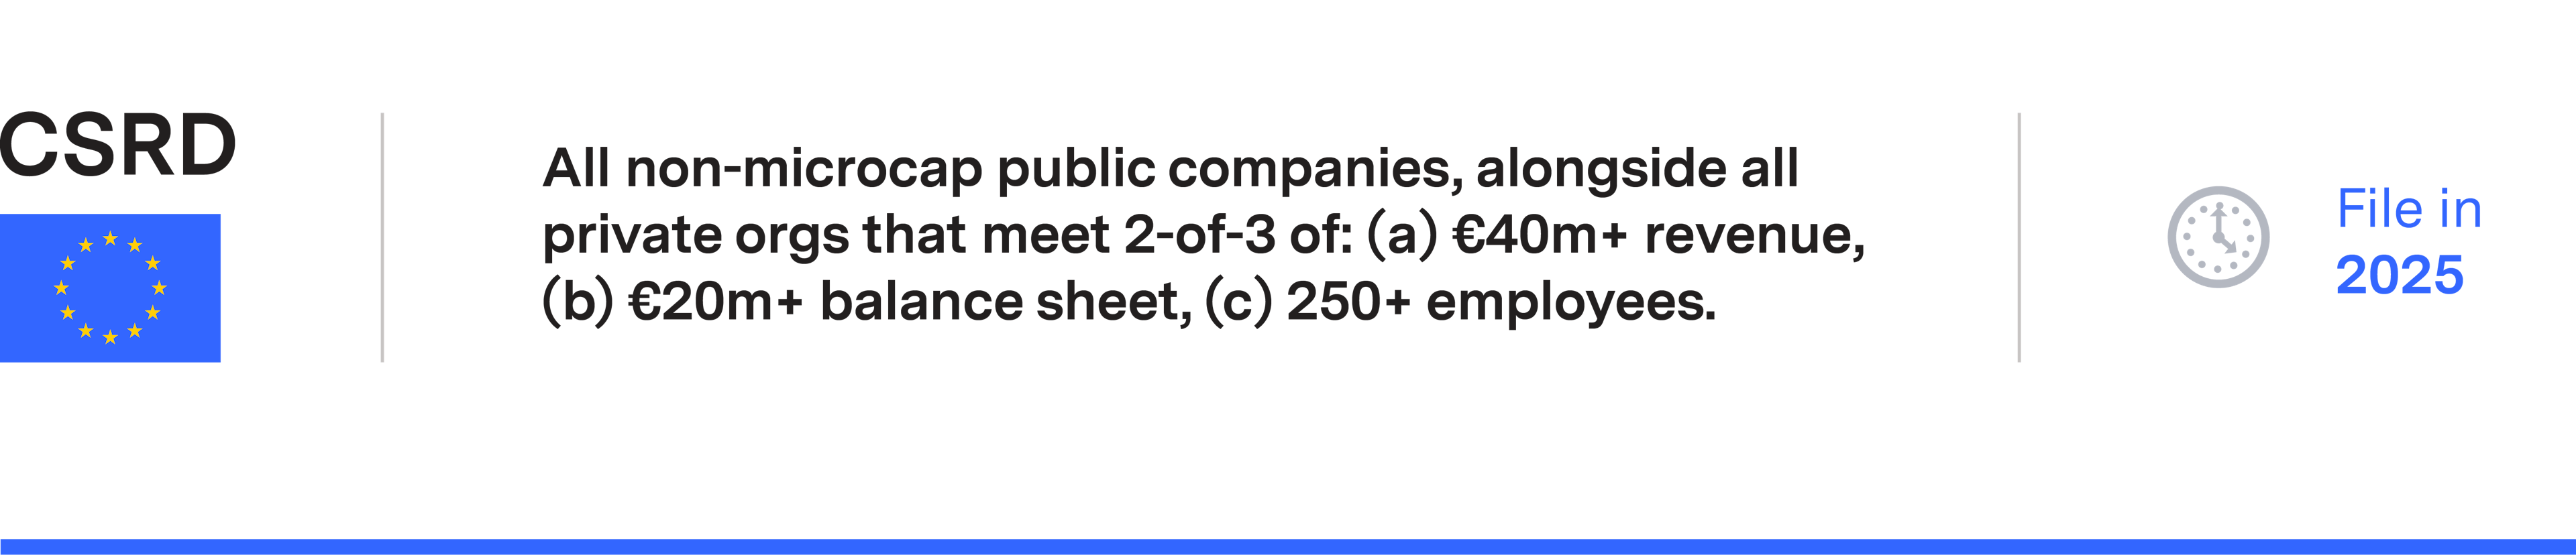 CSRD requirement: All non-microcap public companies, alongside all private orgs that meet 2-of-3 of: (a) £40m+ revenue, (b) £20m+ balance sheet, (c) 250+ employees. File in 2023.